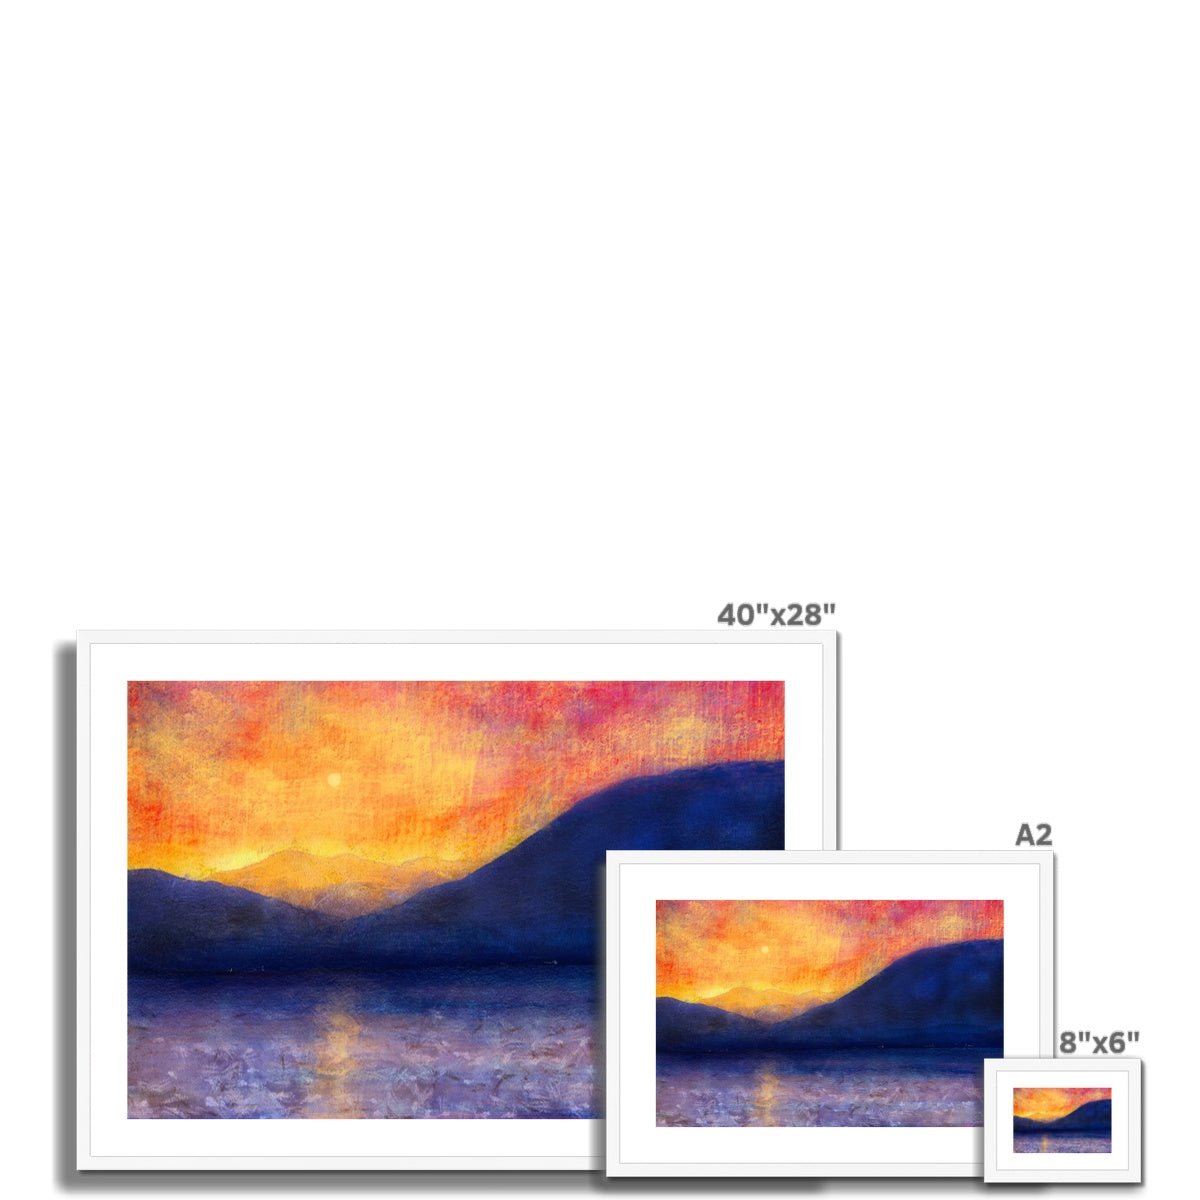 Sunset Approaching Mull Painting | Framed & Mounted Prints From Scotland-Framed & Mounted Prints-Hebridean Islands Art Gallery-Paintings, Prints, Homeware, Art Gifts From Scotland By Scottish Artist Kevin Hunter